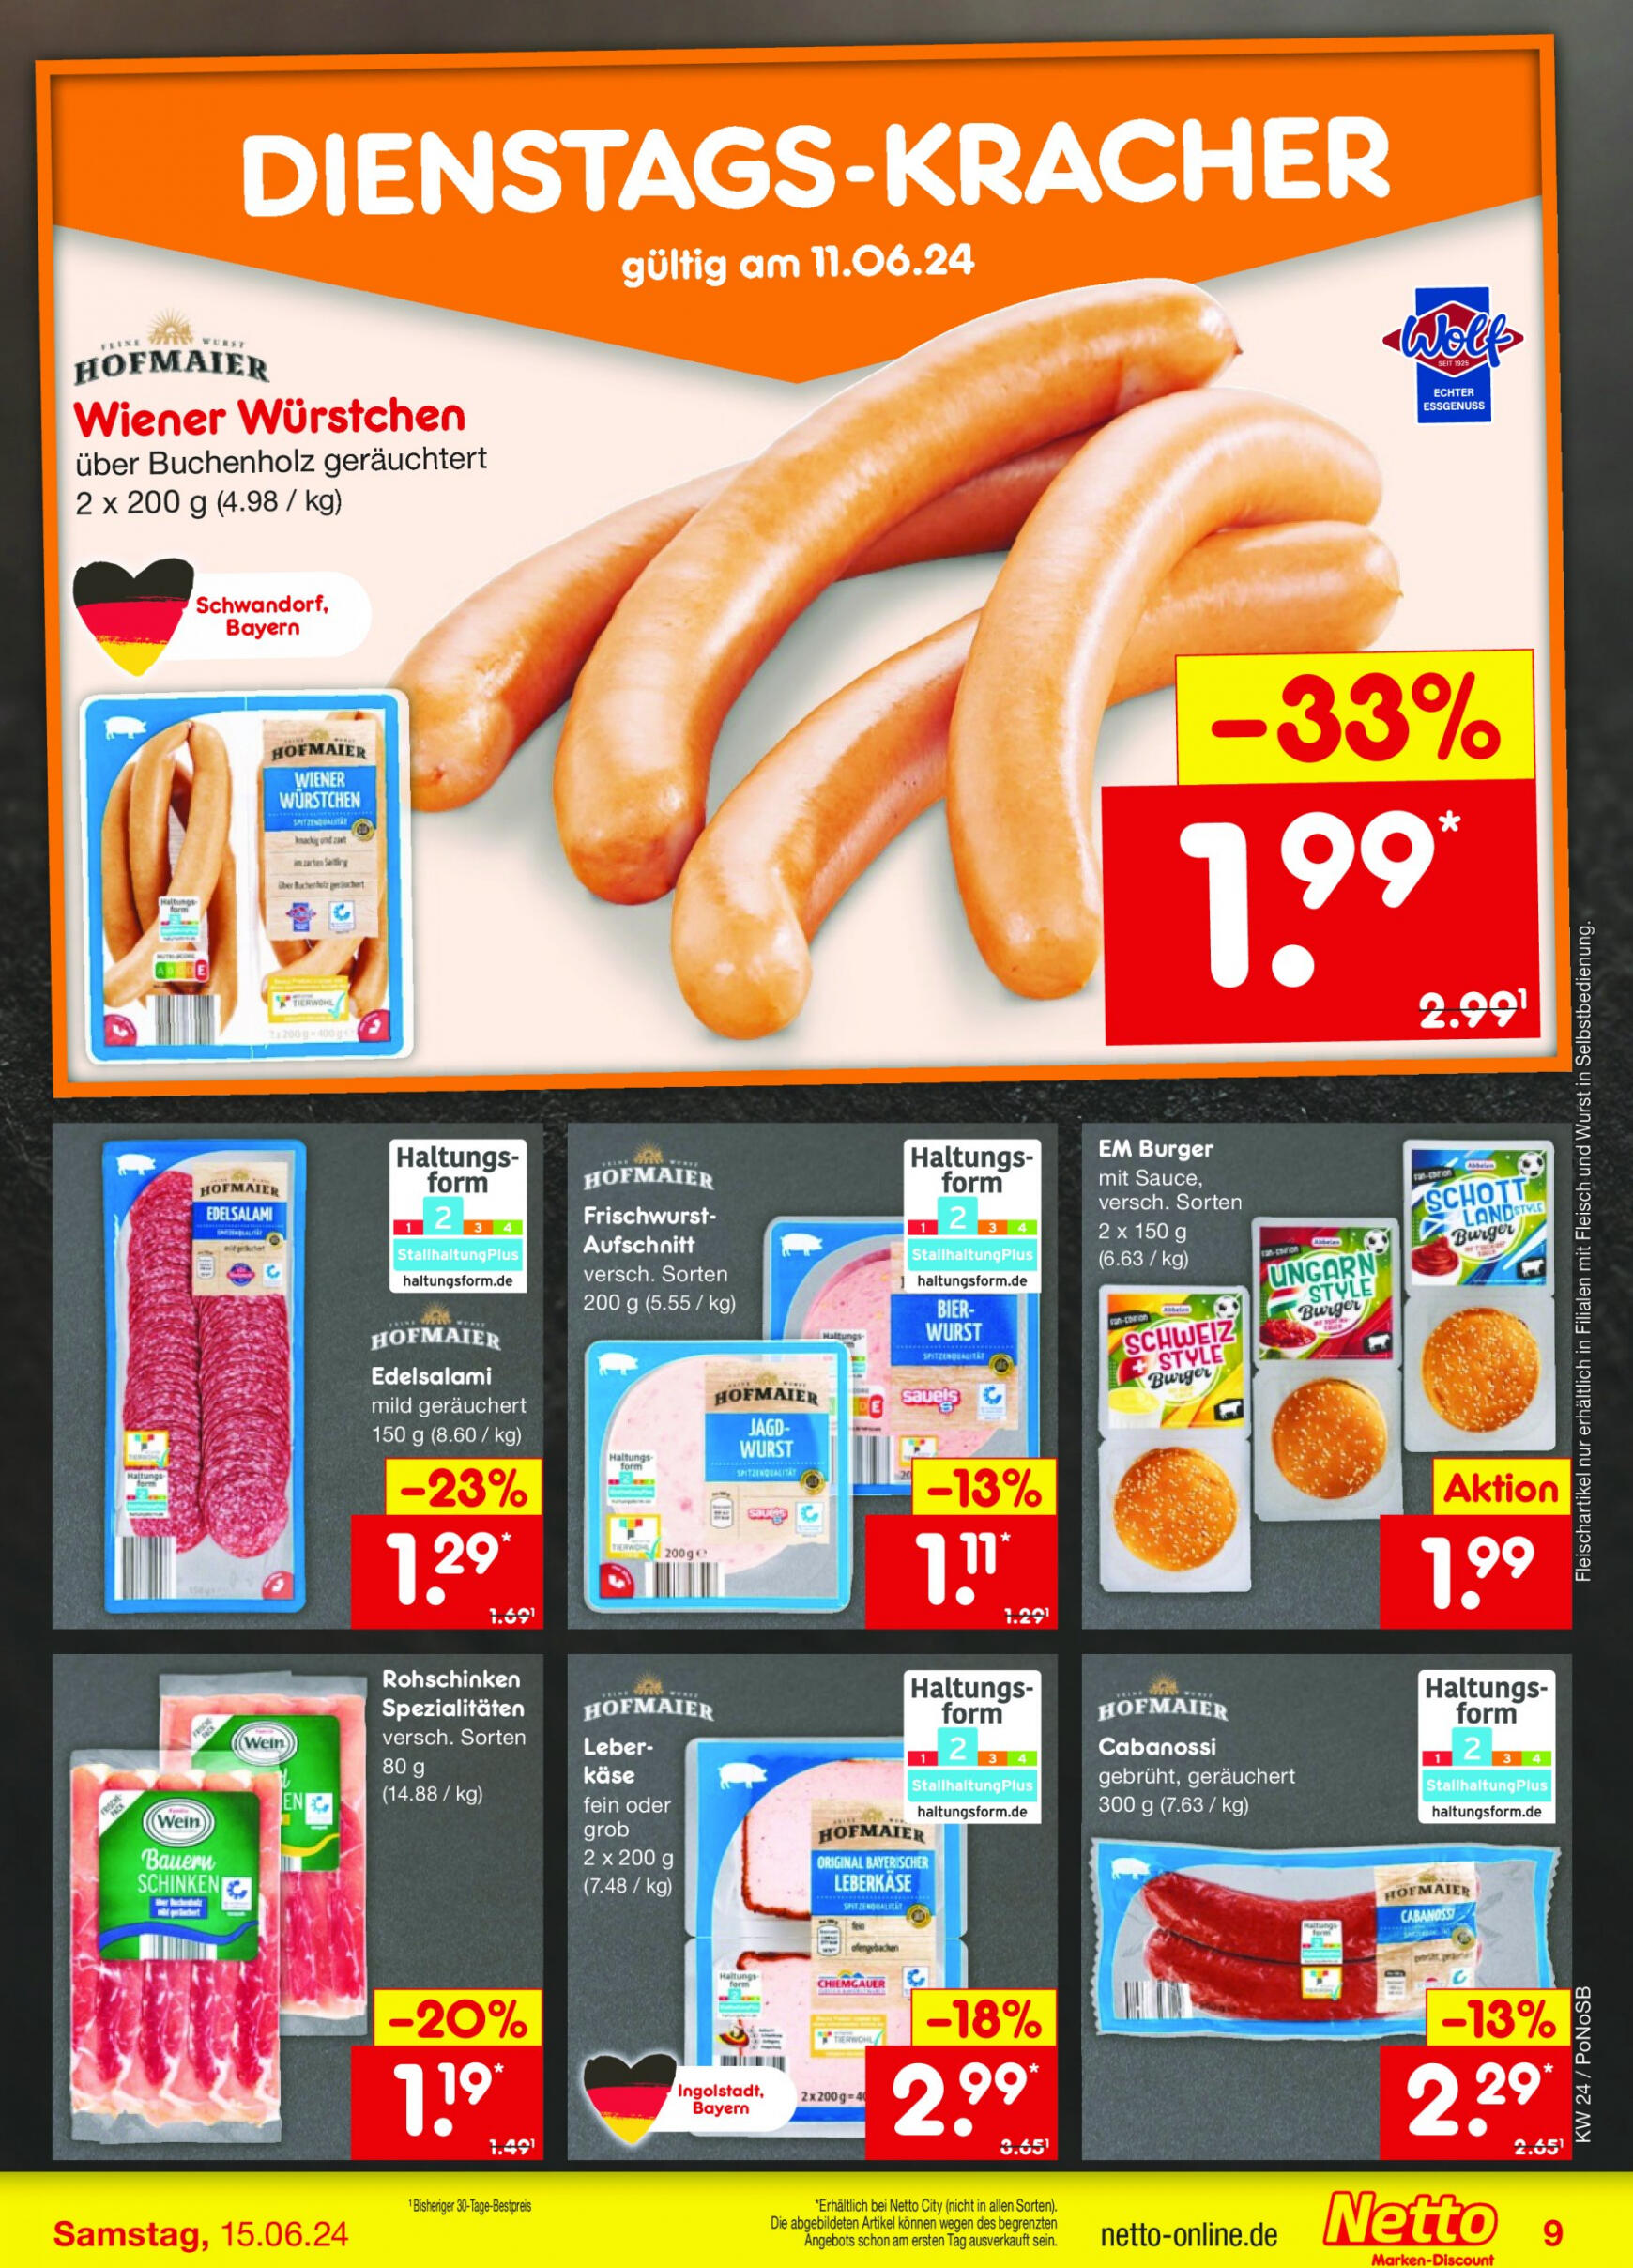 netto - Flyer Netto aktuell 10.06. - 15.06. - page: 11